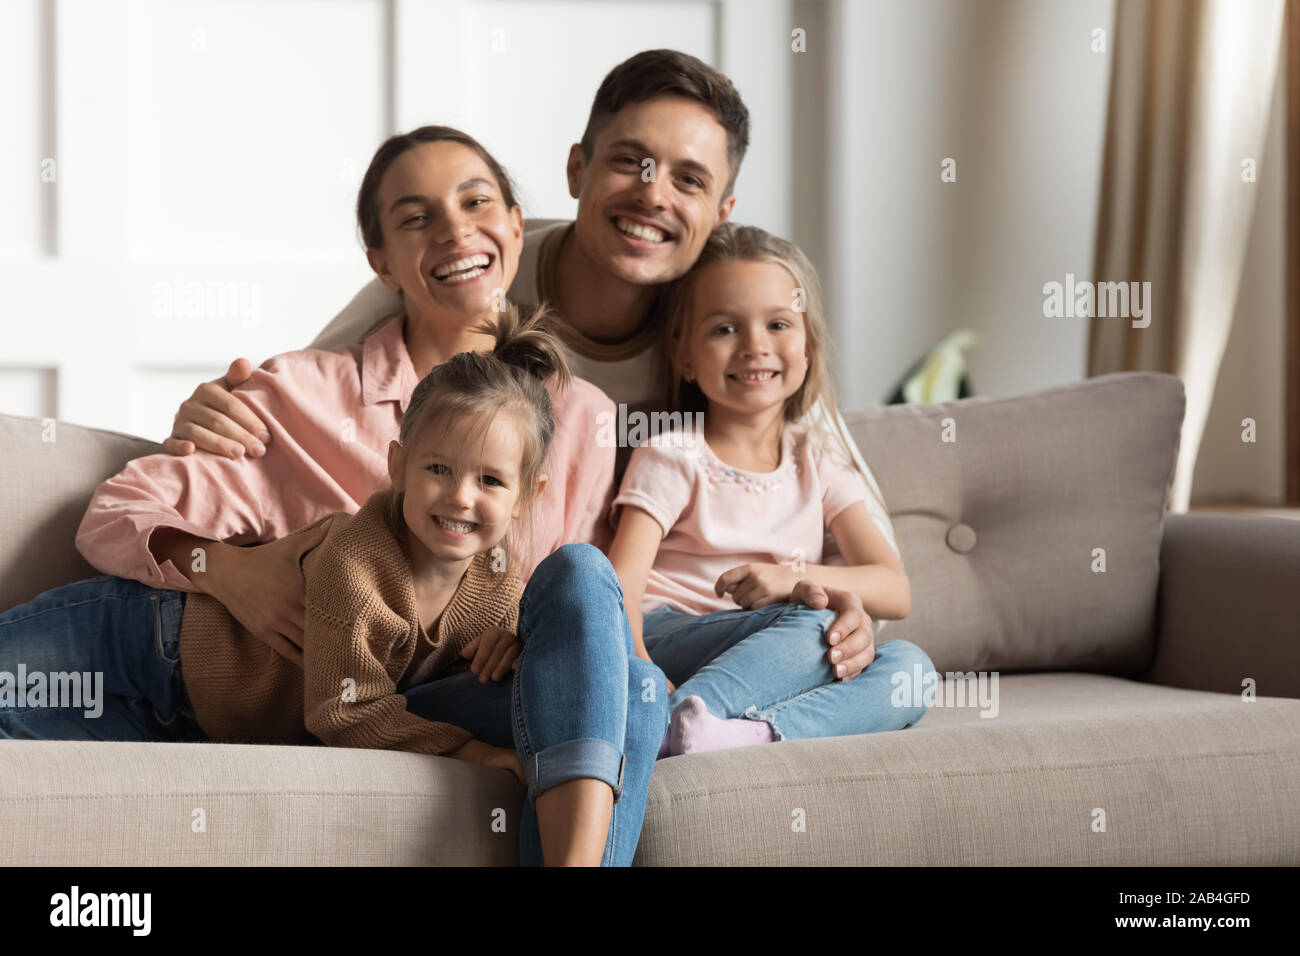 Smiling parents hug small kids daughters relaxing on couch, portrait Stock Photo